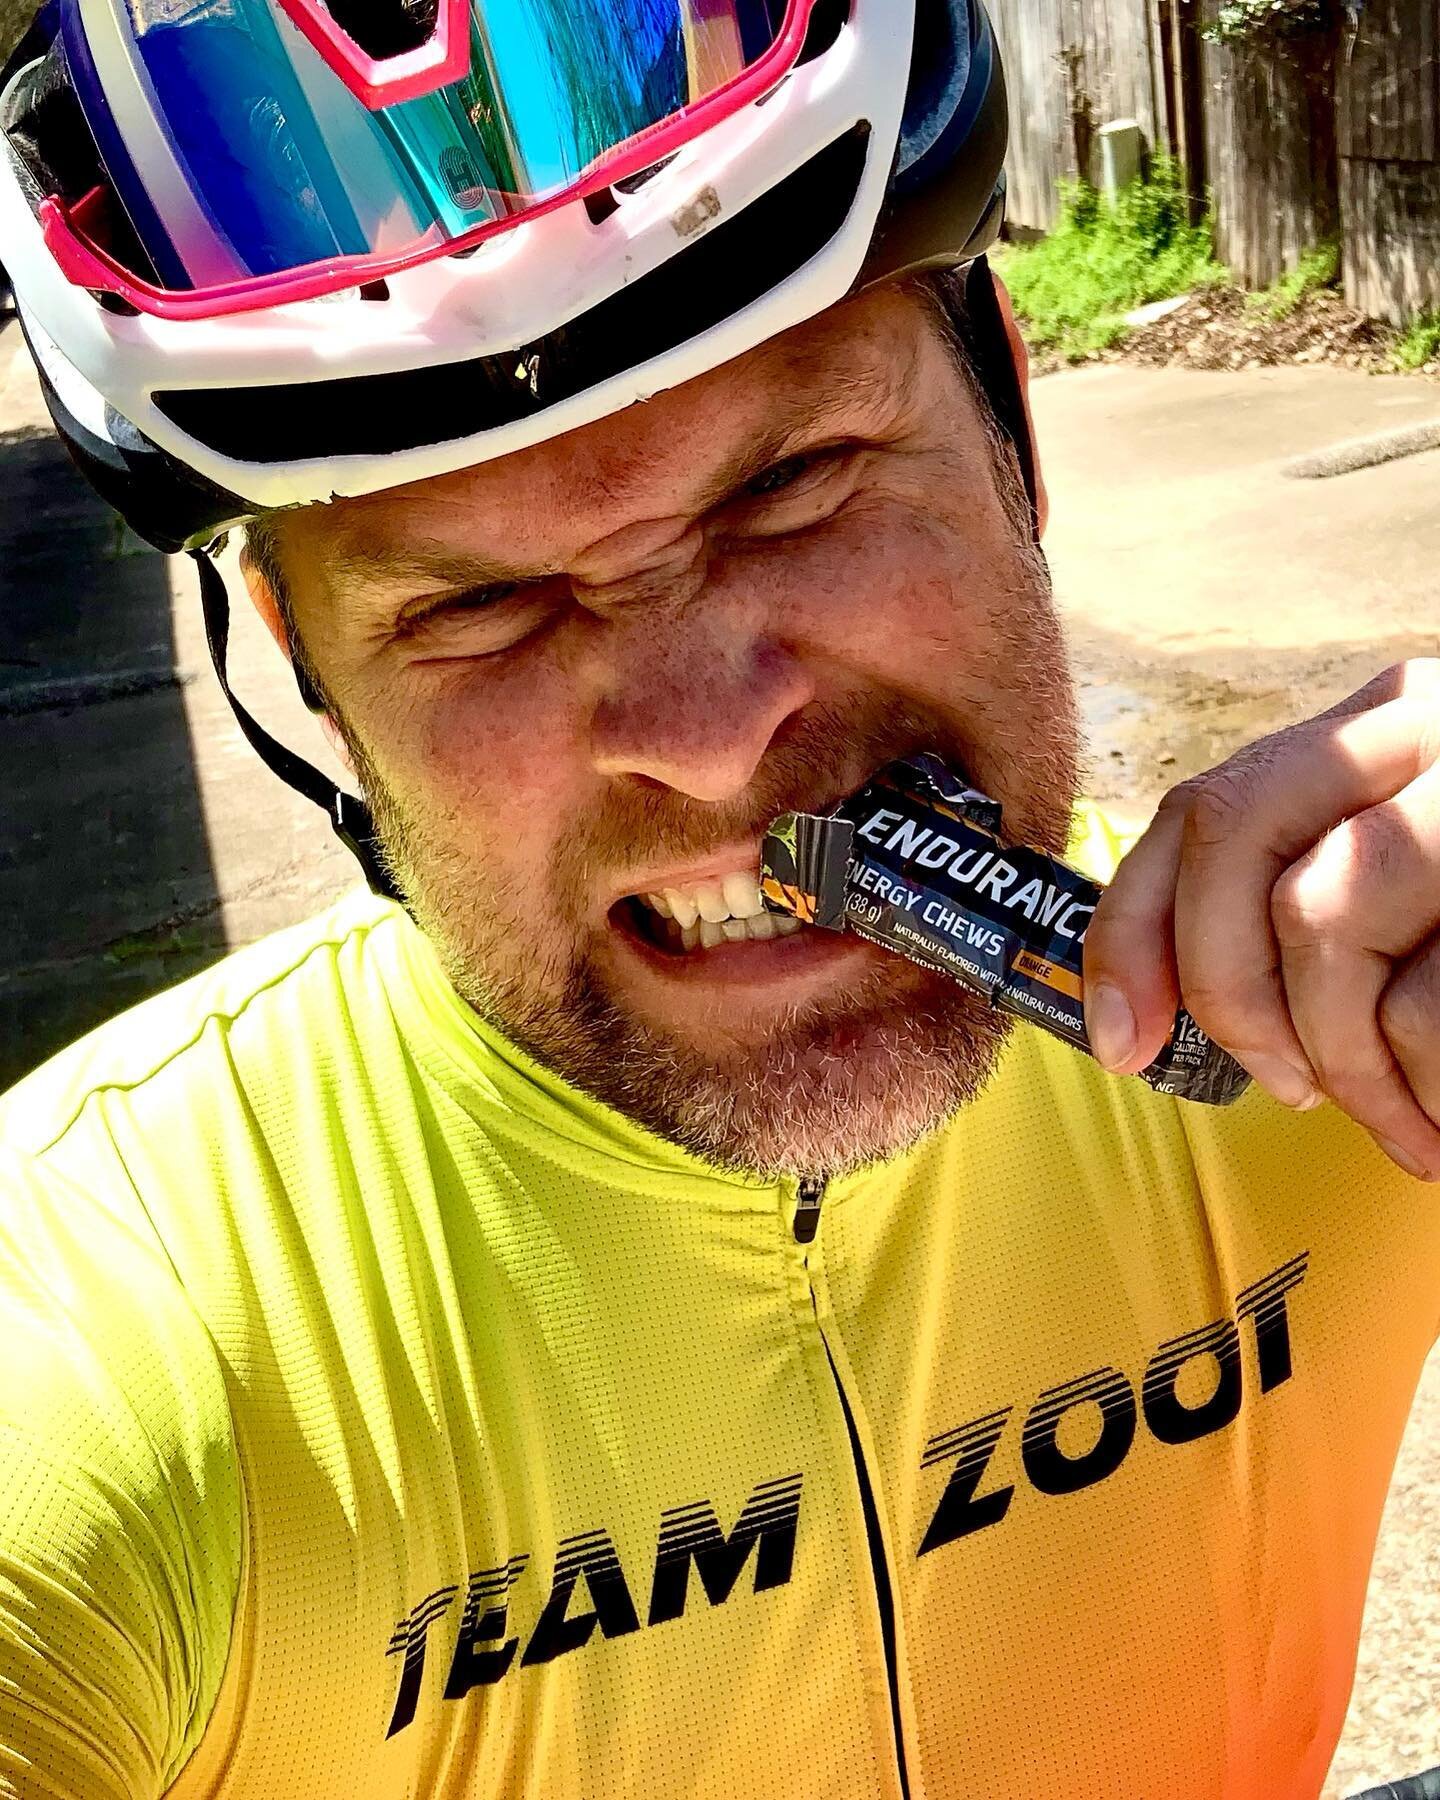 Endurance Sunday!! Perfect day for long steady miles. Even with the headwind. And don&rsquo;t forget your nutrition!! 

#racestationhouston #racingisrad #teamzoot #zootsports #teamzoottexas #wearhandske #coaching #cyclingcoaching